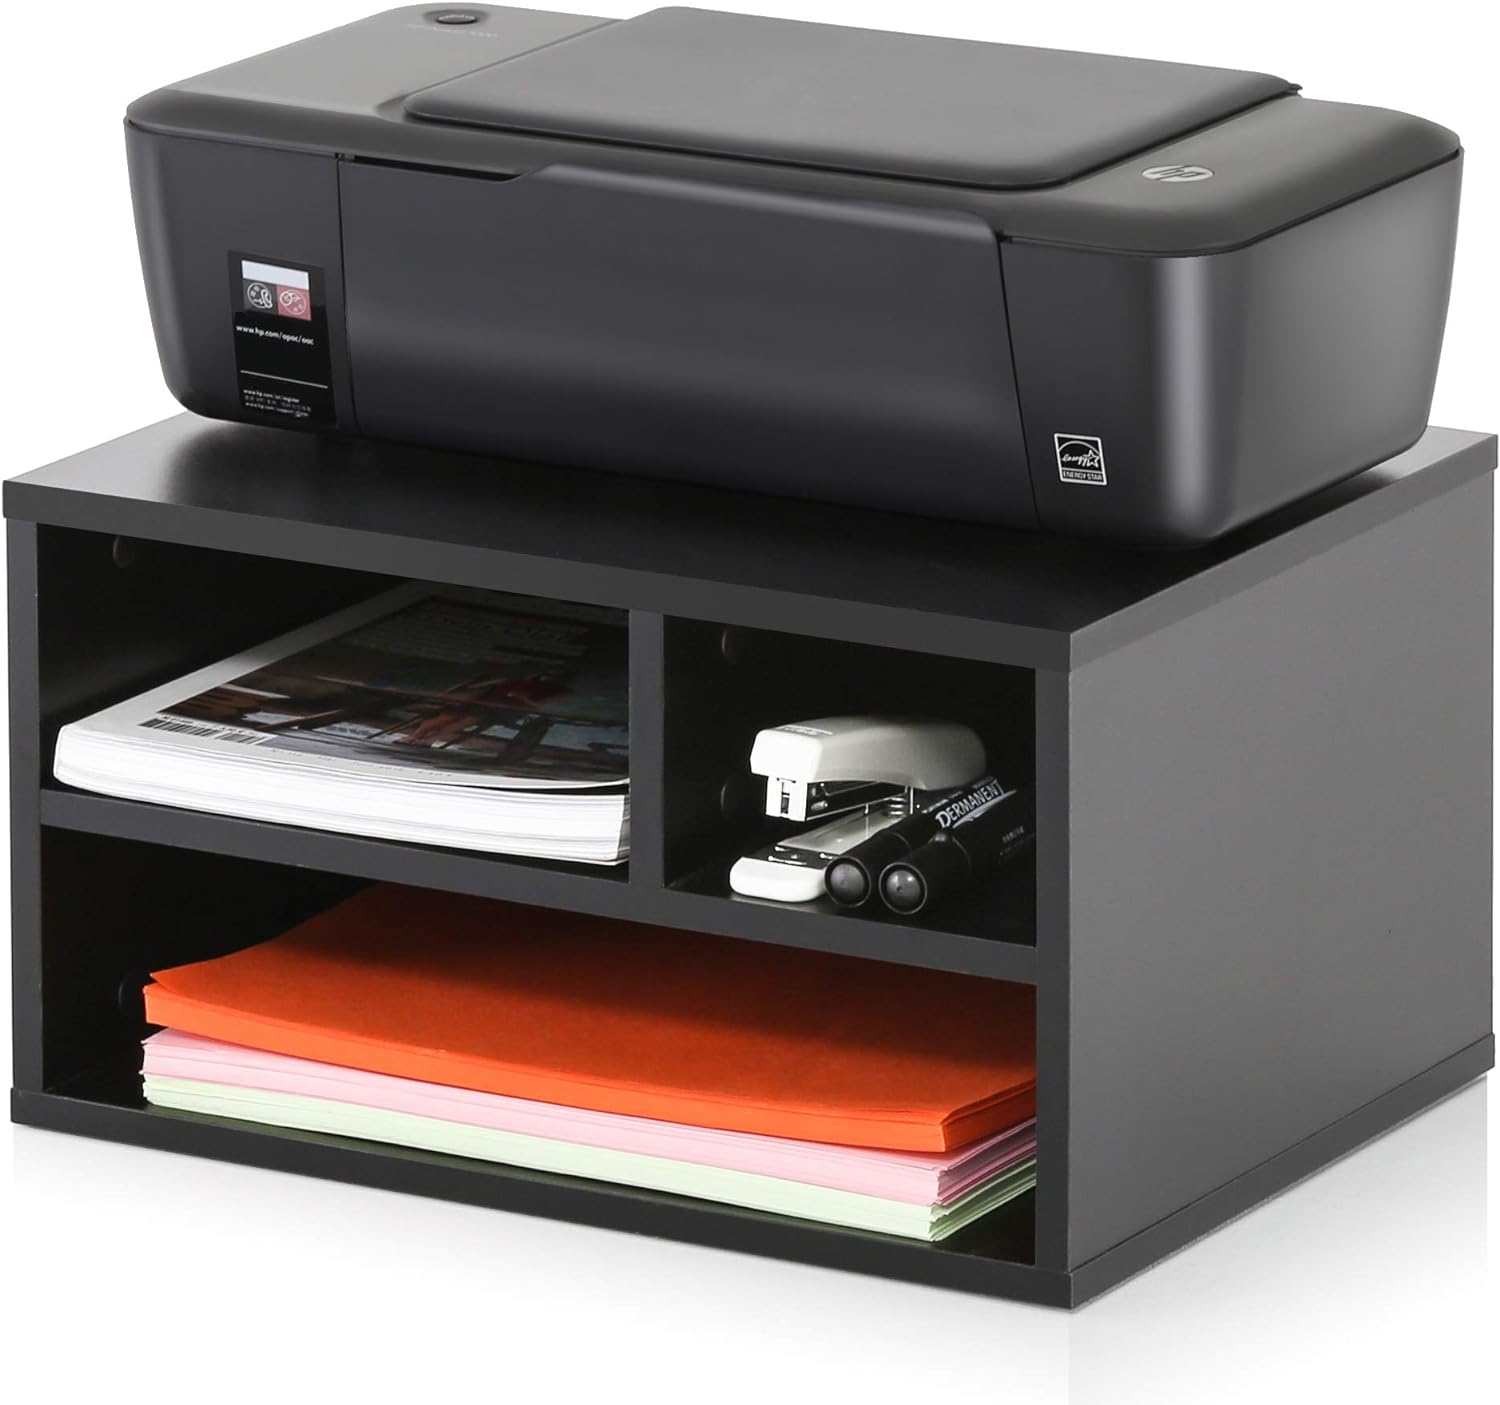 FITUEYES Printer Stands with Storage